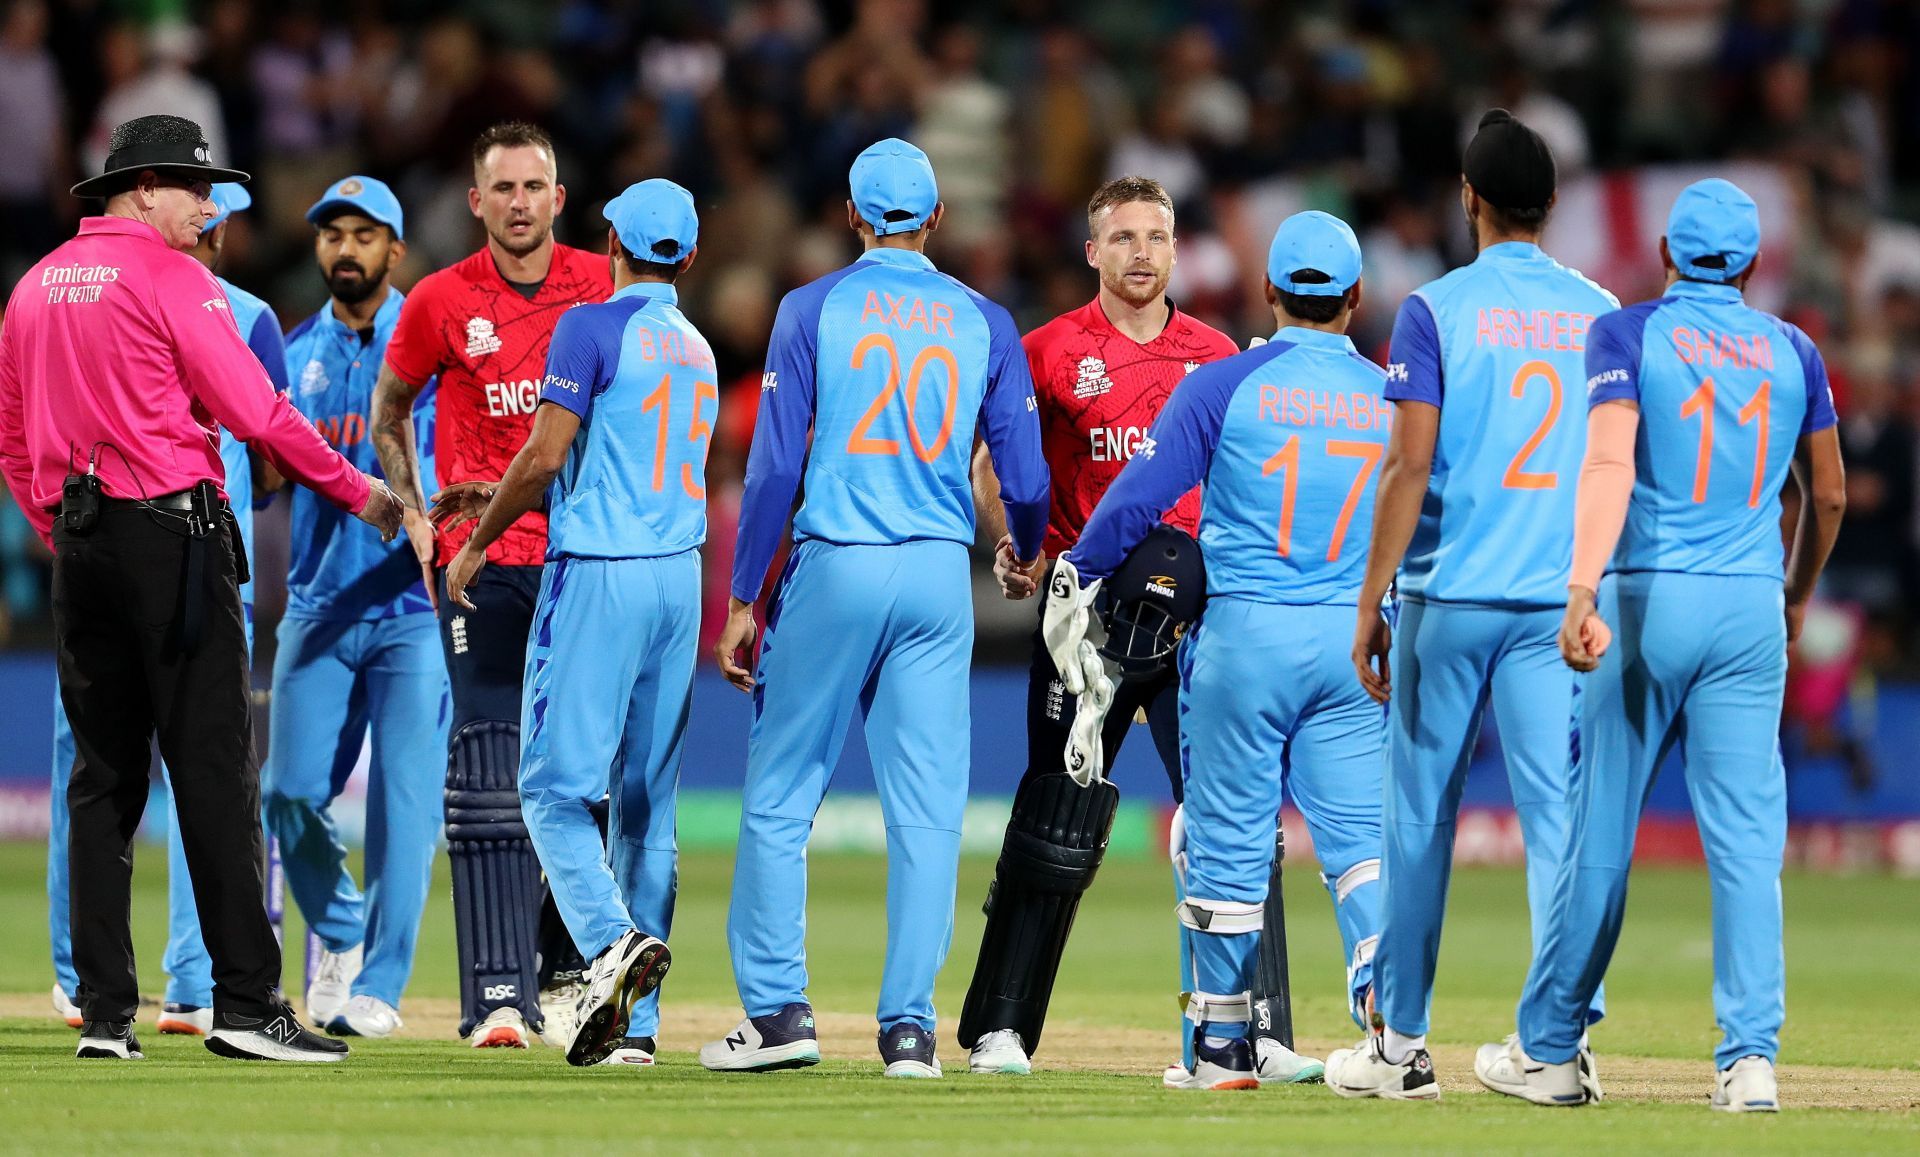 India cannot afford more loopholes like those at the T20 World Cup, lest they resurface like they did in the semifinal against England.